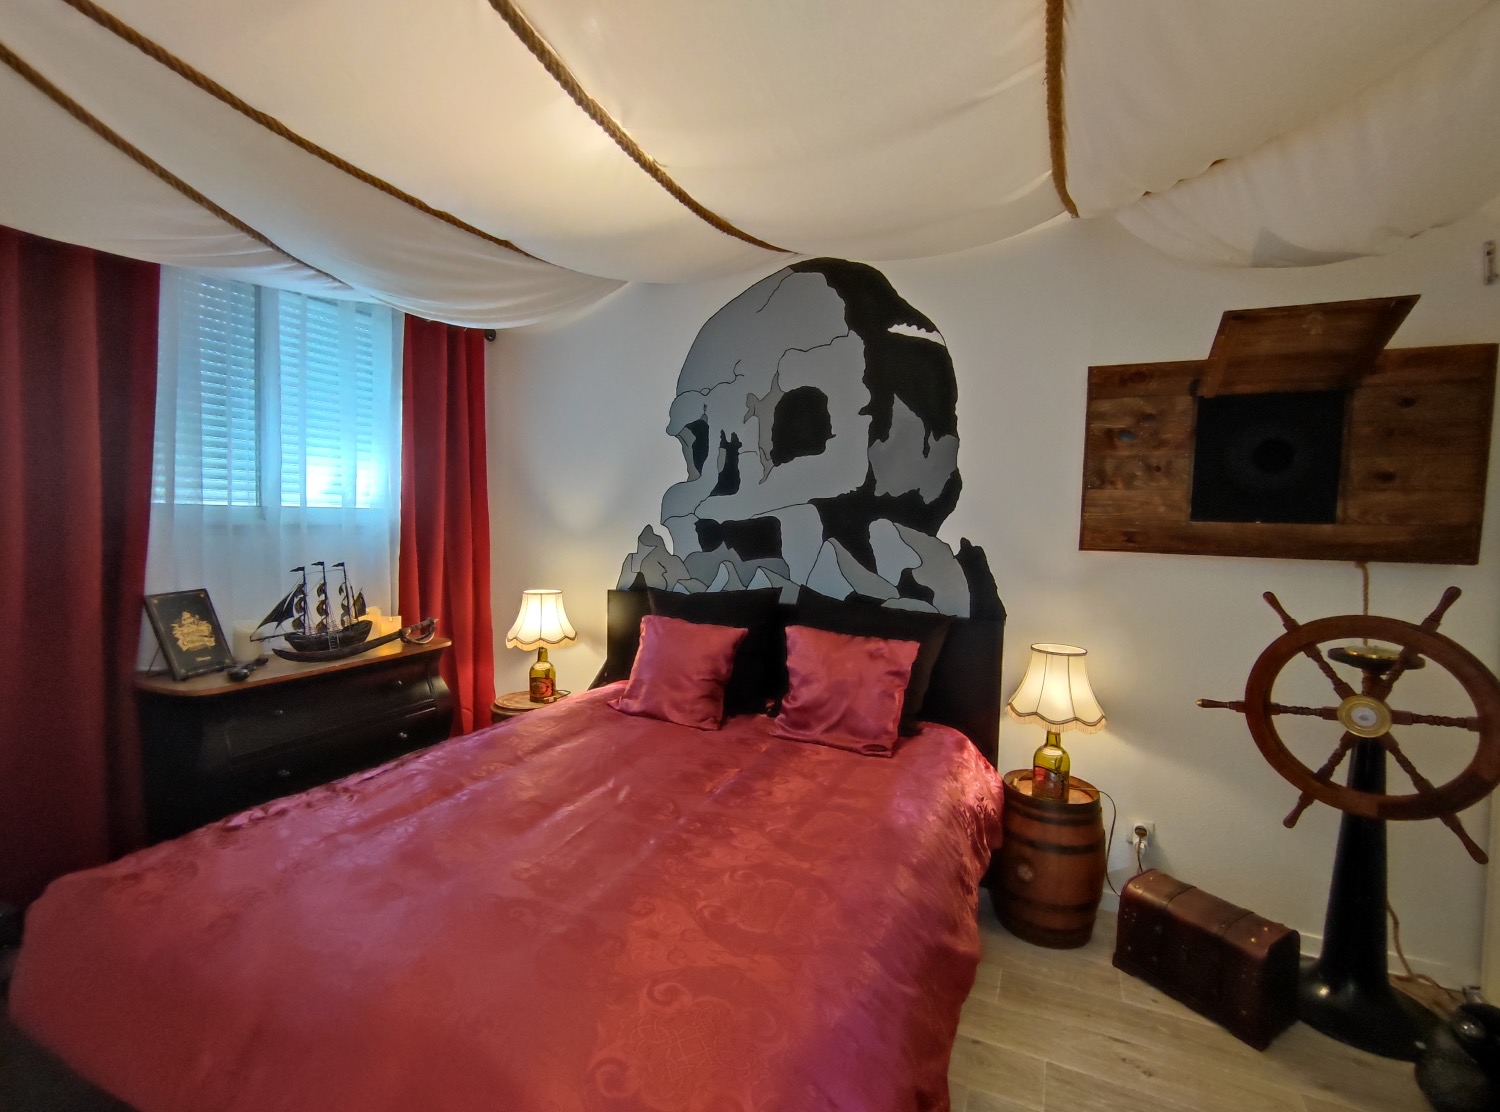 Pirates of the Caribbean Themed rooms near Disneyland Paris, AdventureHome by Tadico Homes